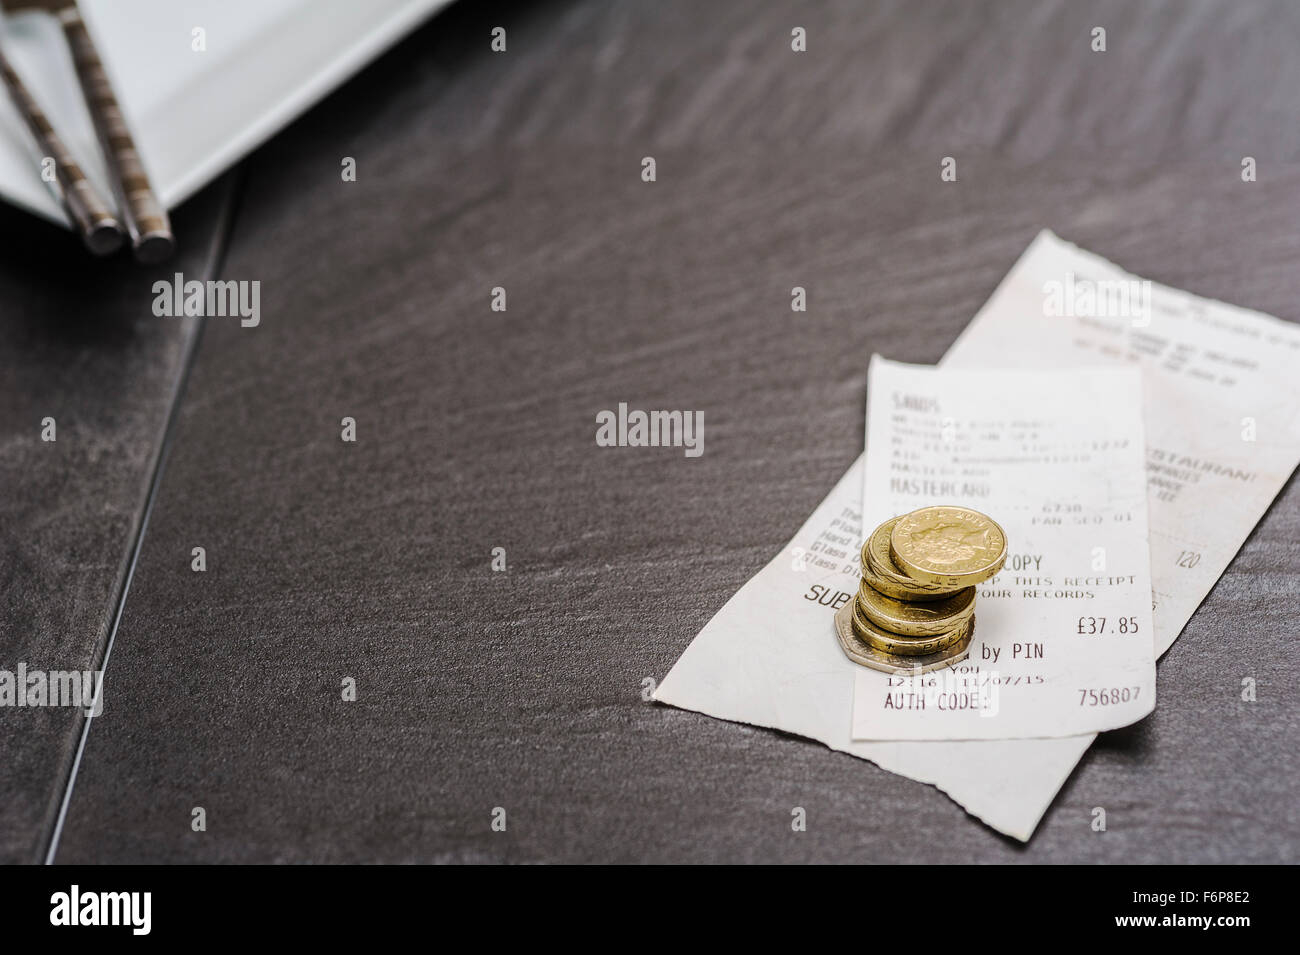 Bill or check with a tip.Restaurant leaving a gratuity and bill paying. Leaving a tip after a meal. Stock Photo